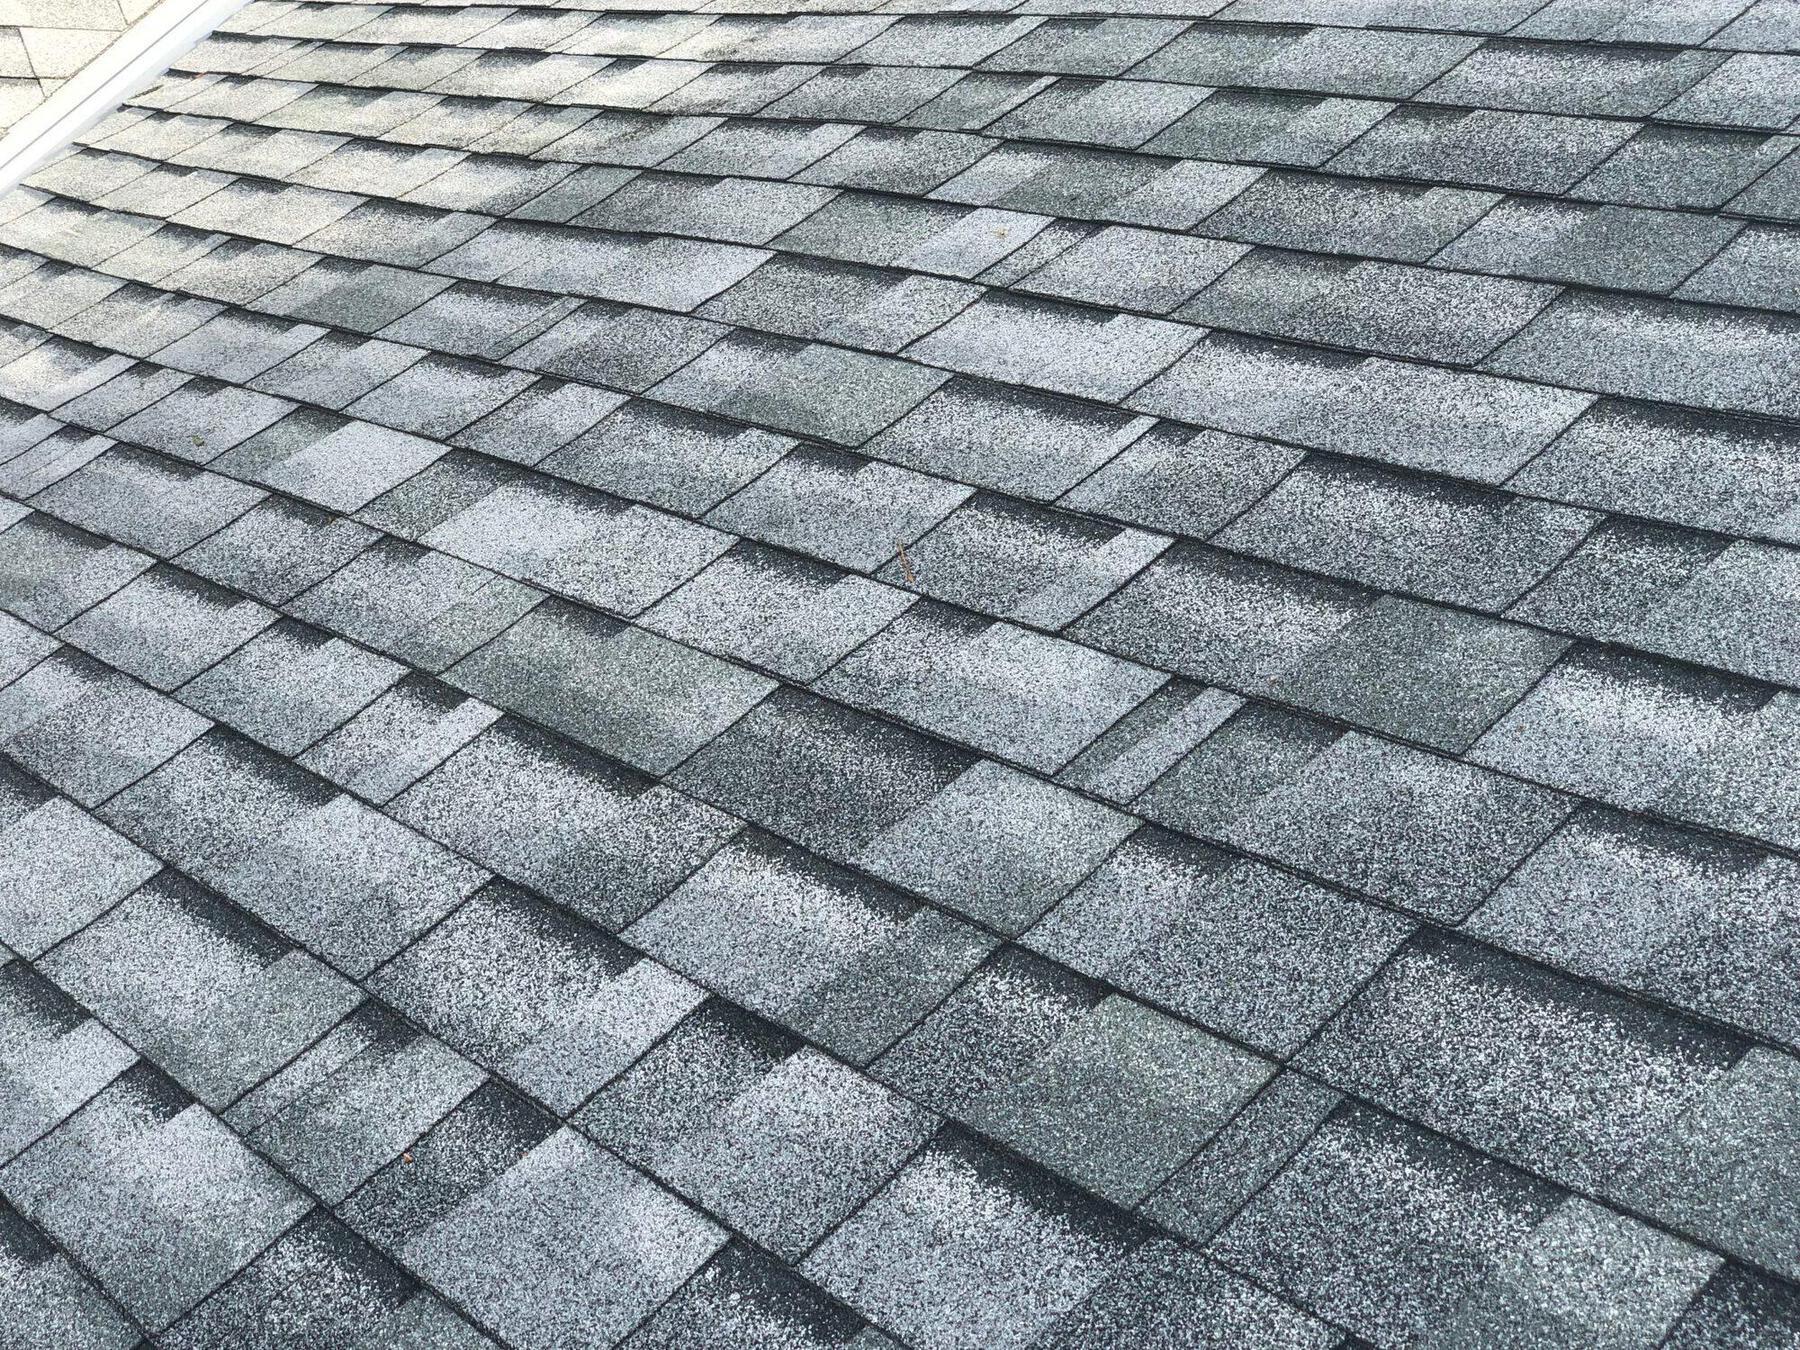 Architectural shingles taken from Roof Life roofer